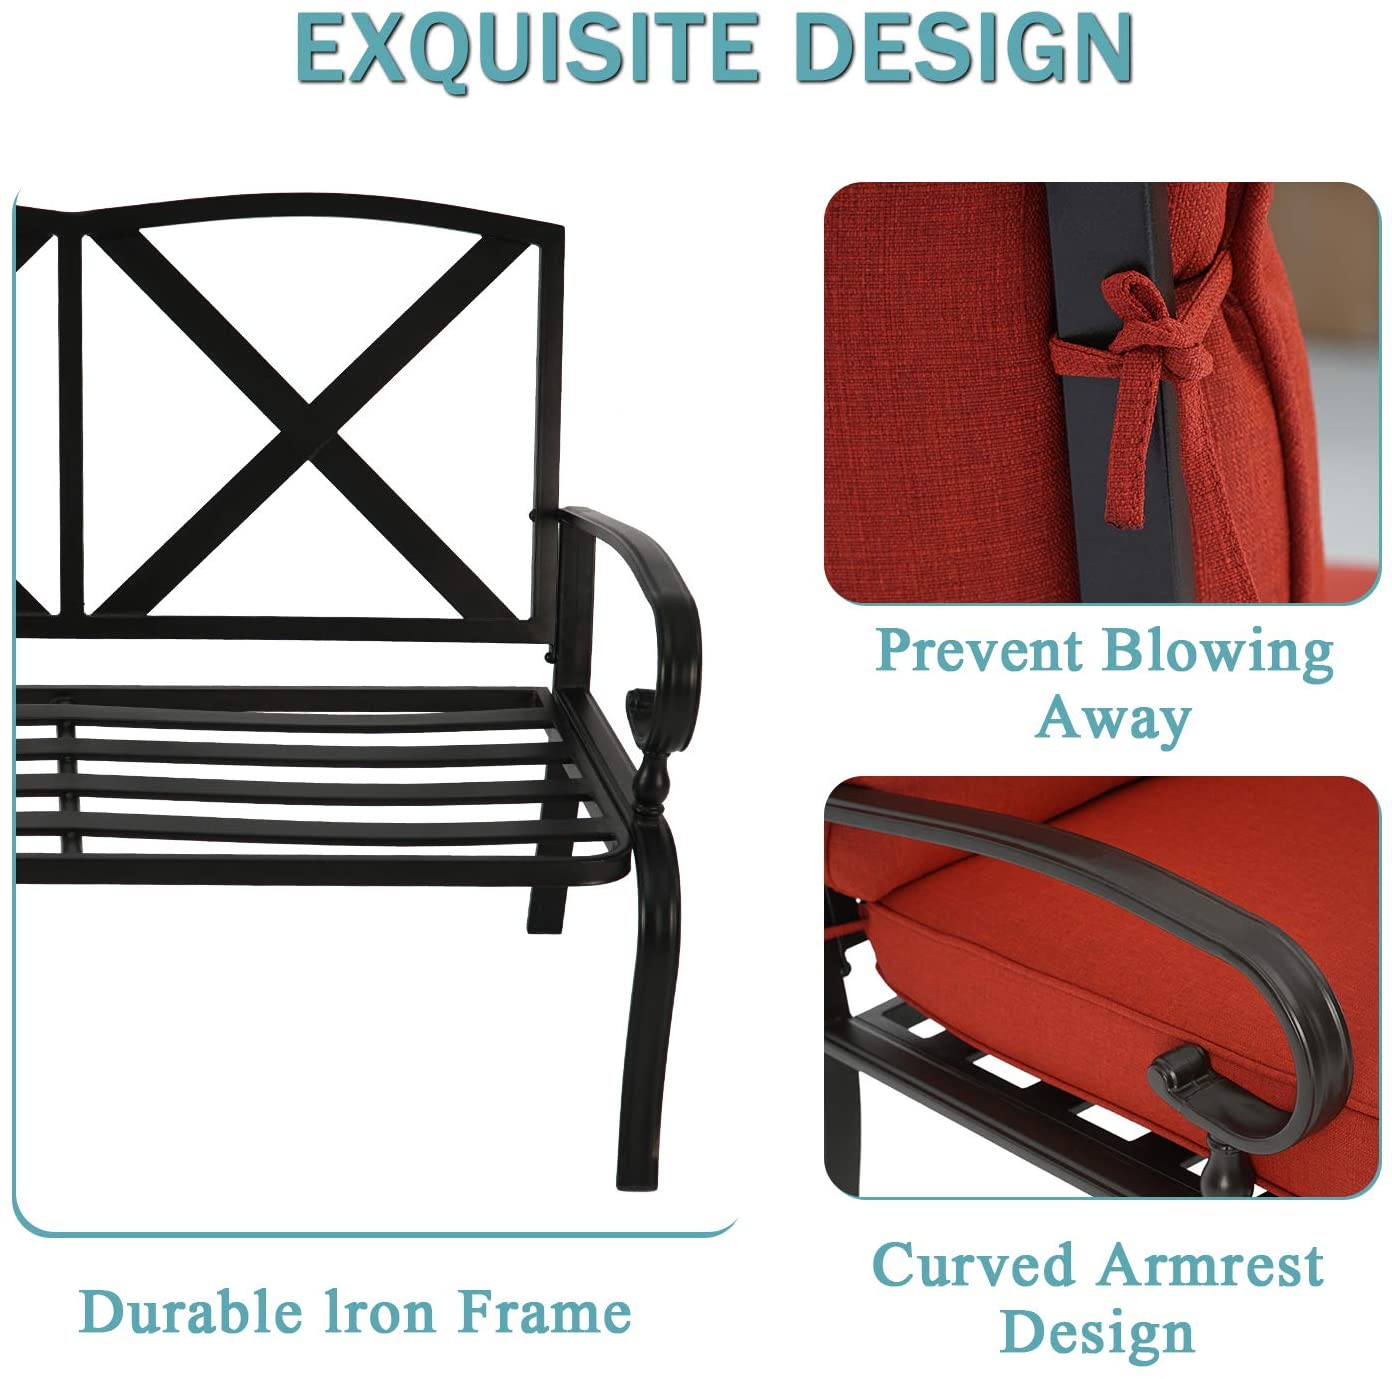 SUNCROWN 2-Piece Patio Furniture Outdoor Loveseat Set Wrought Iron Frame Bench Sofa with Coffee Table, Red - image 2 of 6